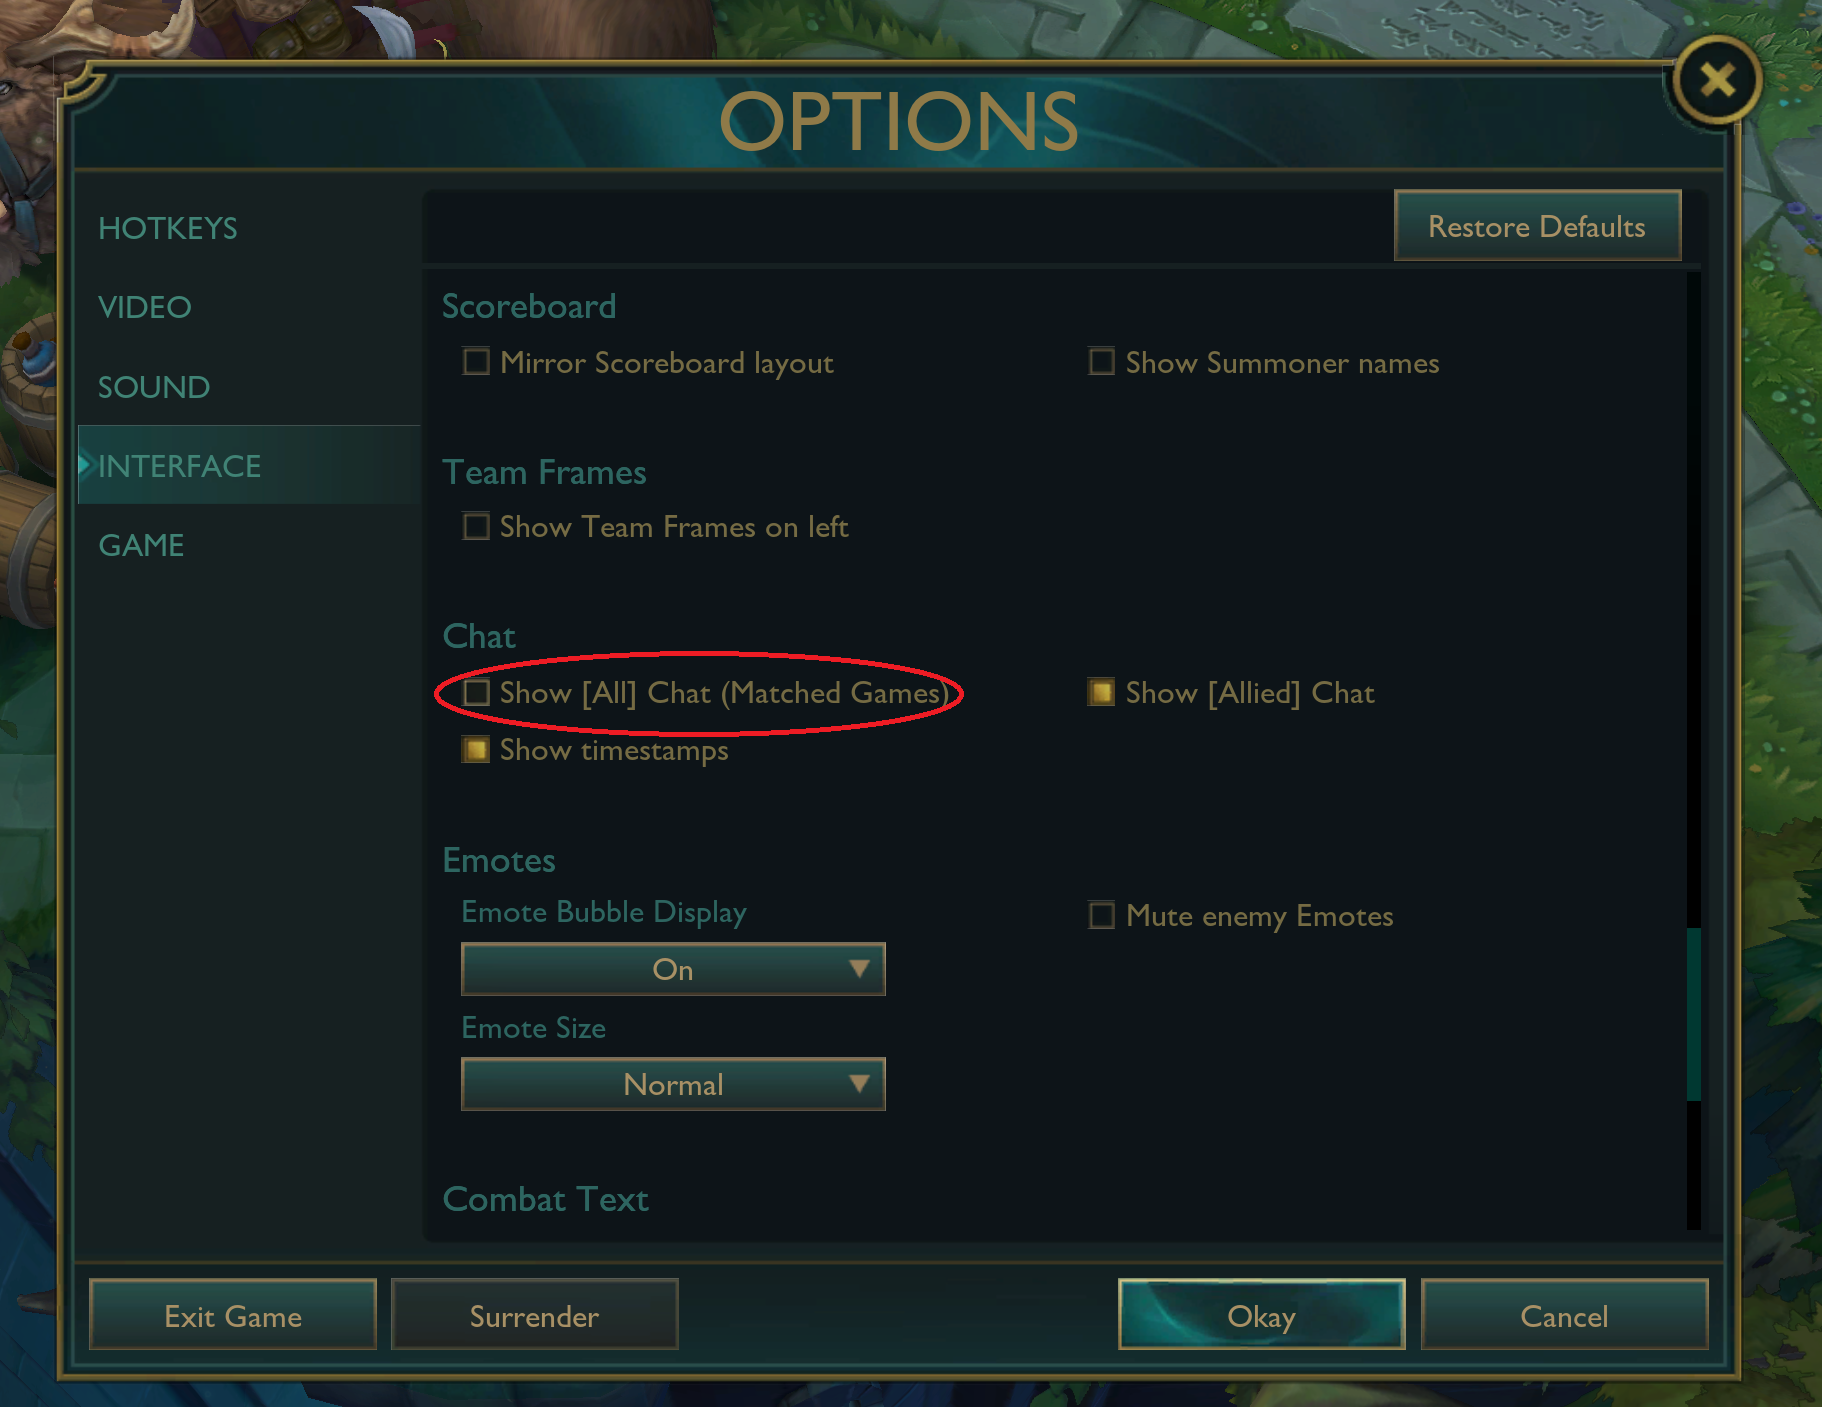 How to disable chat in lol